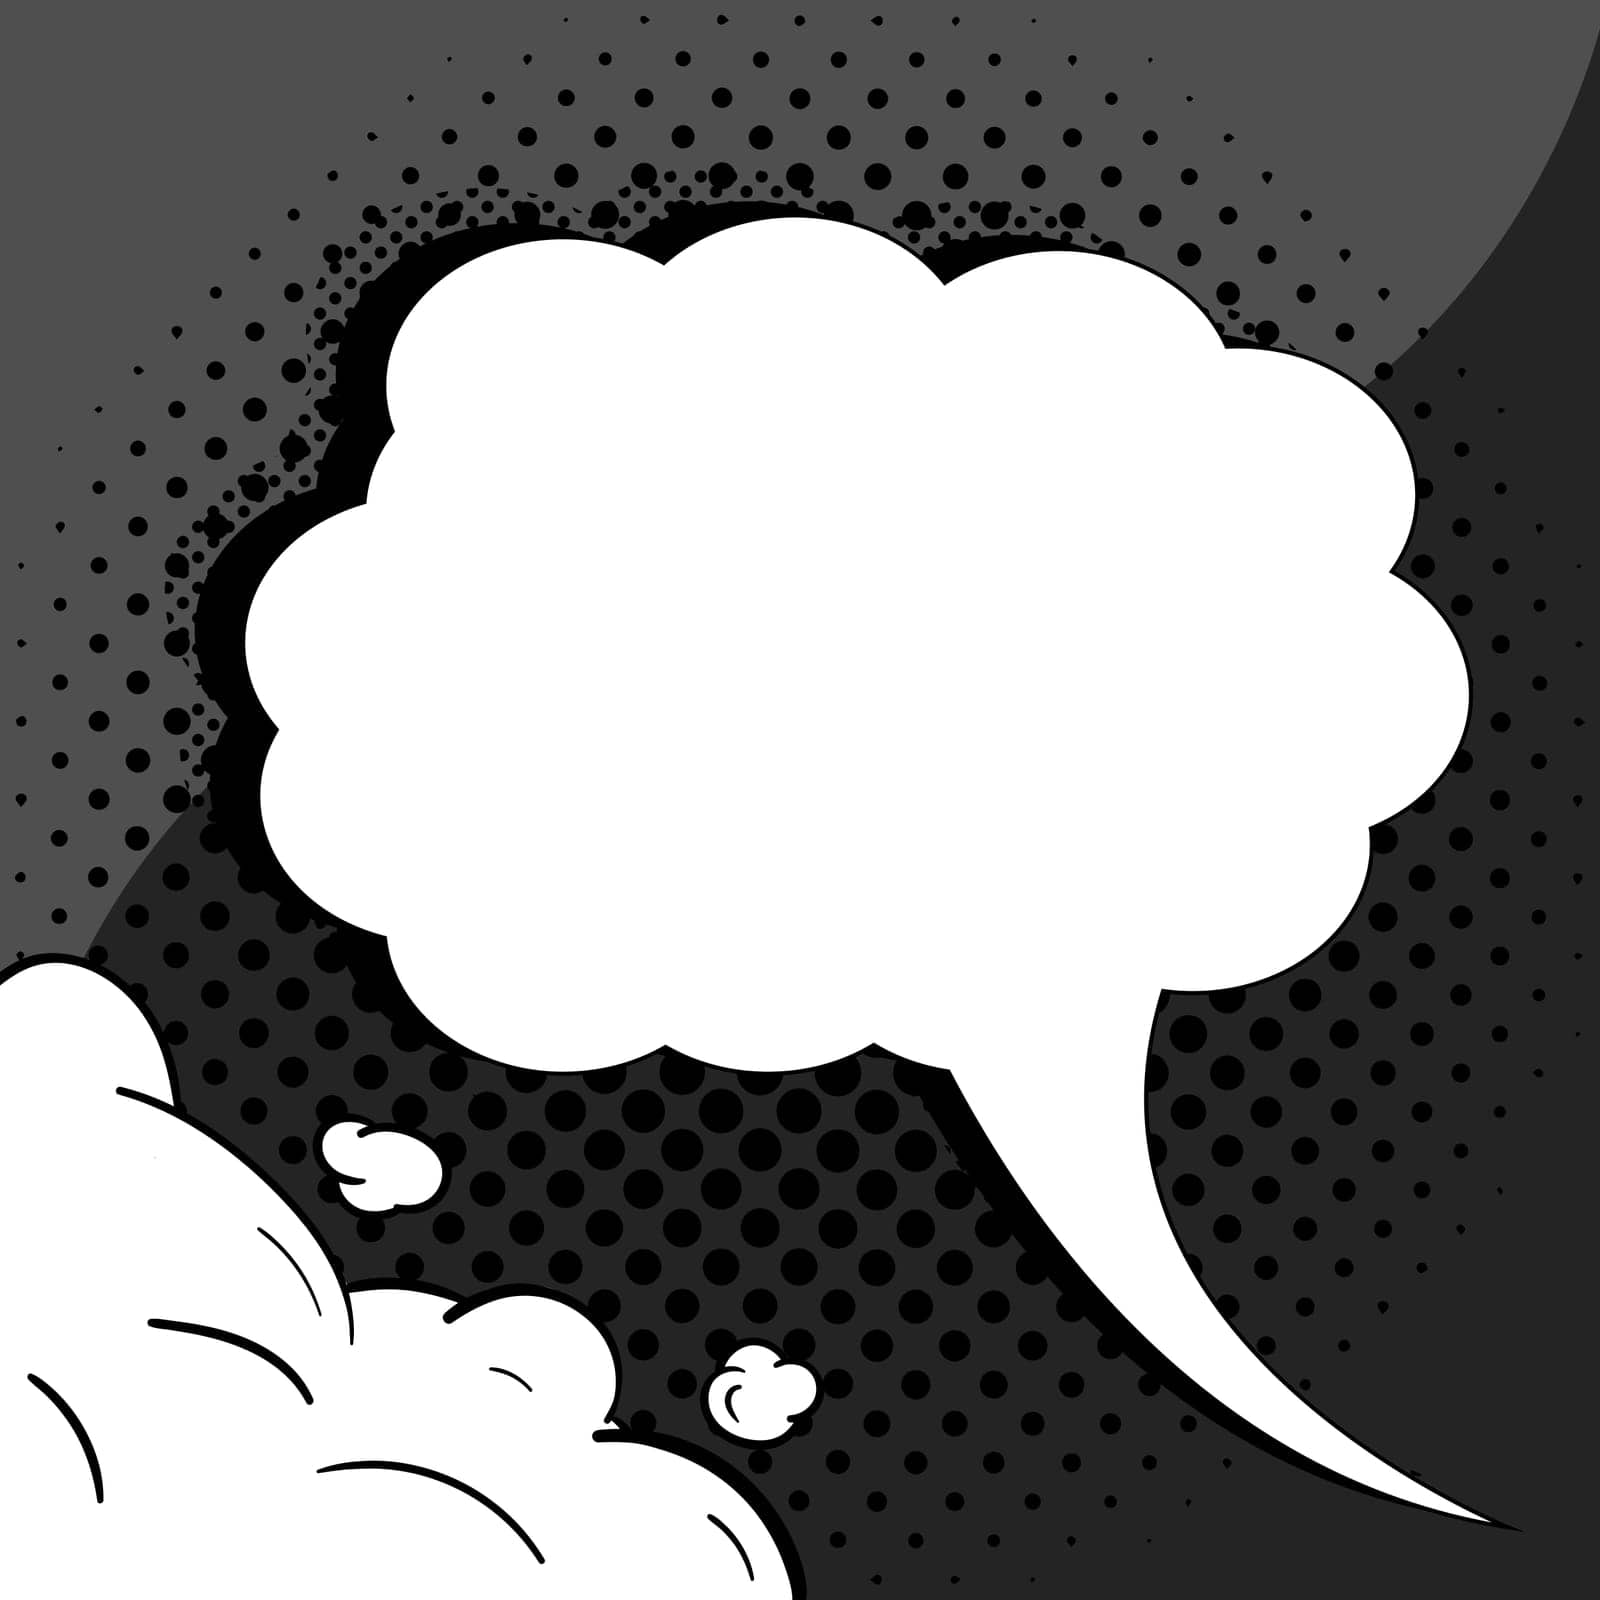 Comic Blank Speech Bubble With Copy Space Over Color Background Design. Empty Template In Explosion Framework Representing Advertisement And Promoting Business. by nialowwa